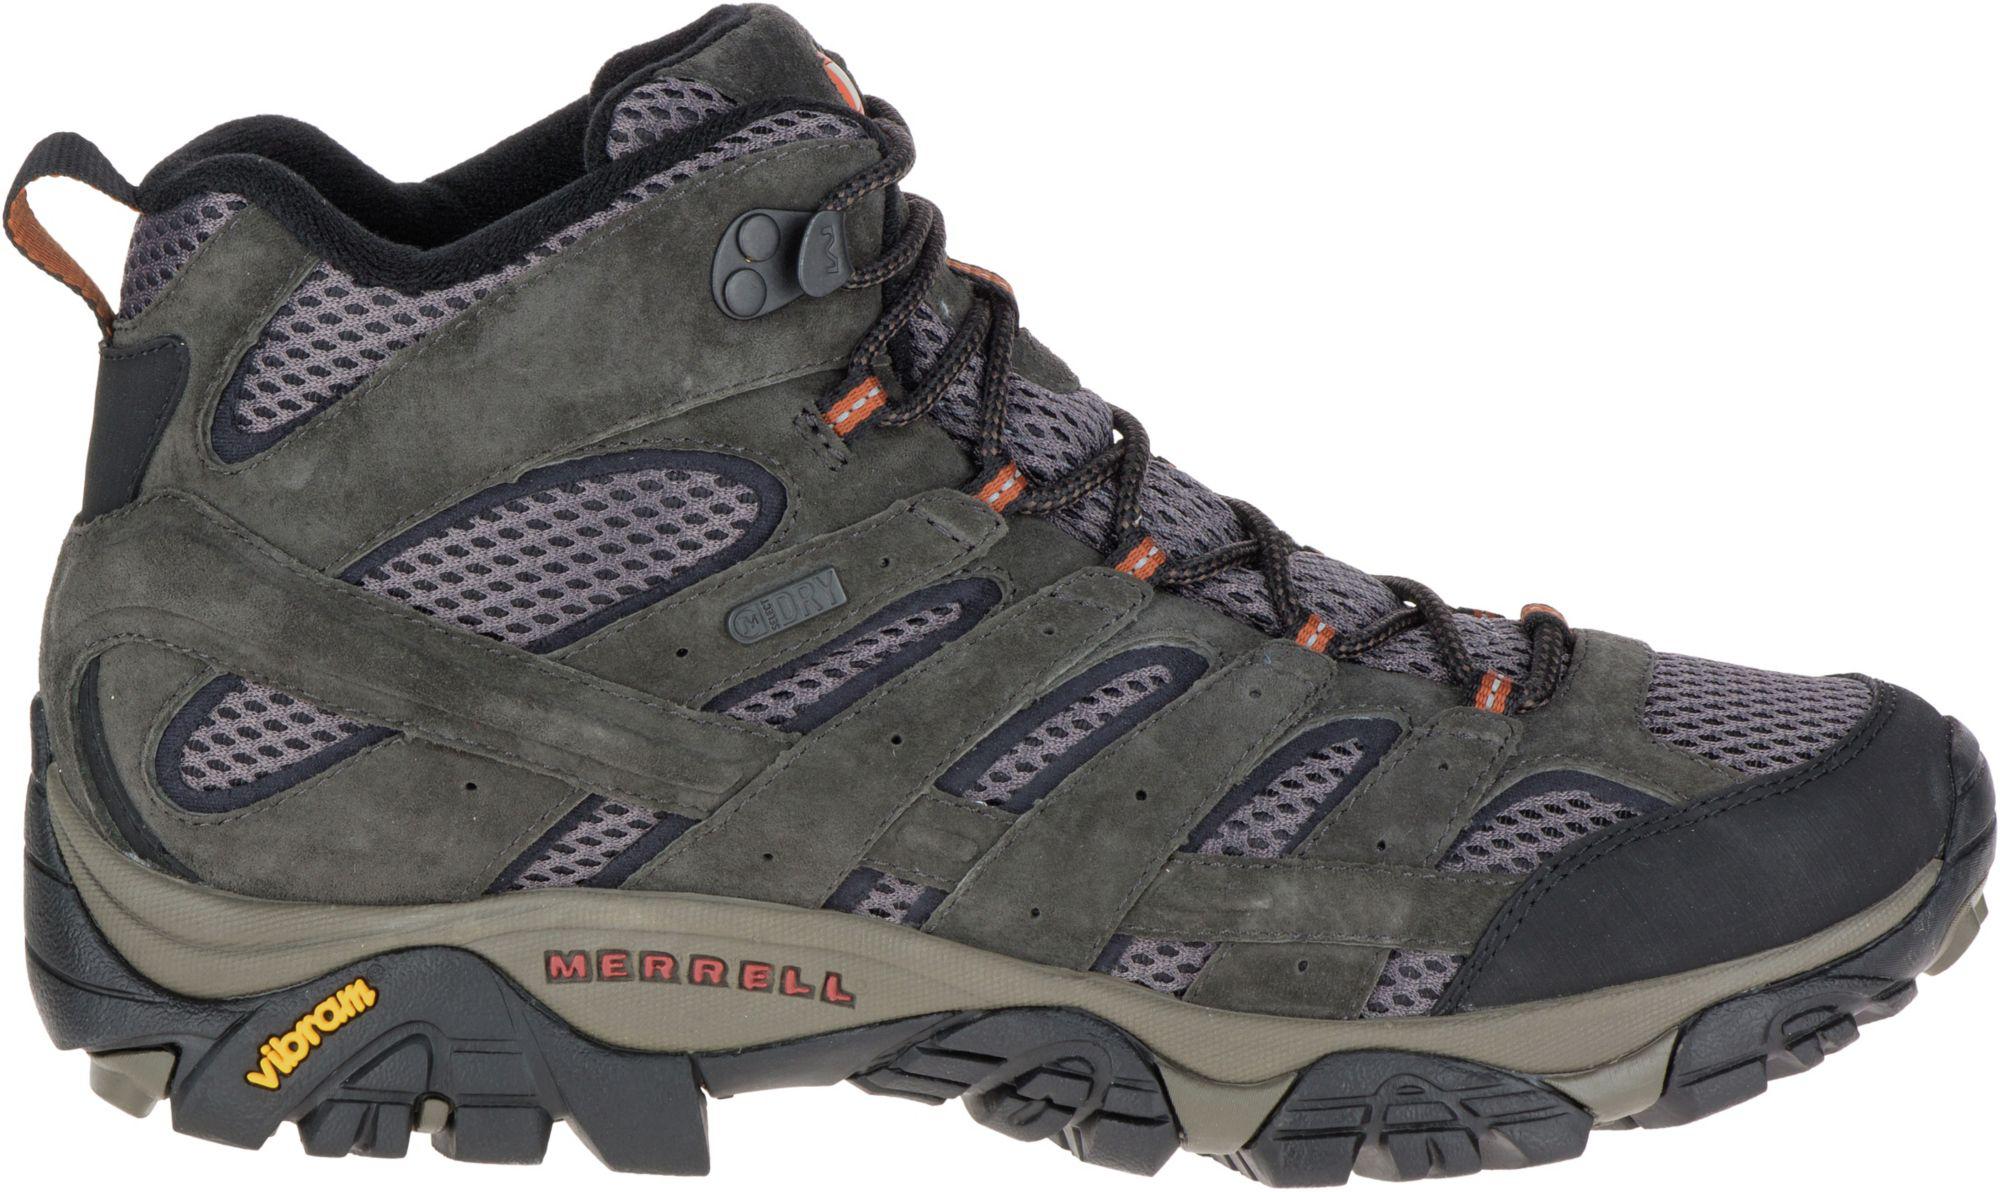 Lyst - Merrell Moab 2 Mid Waterproof Hiking Boots for Men